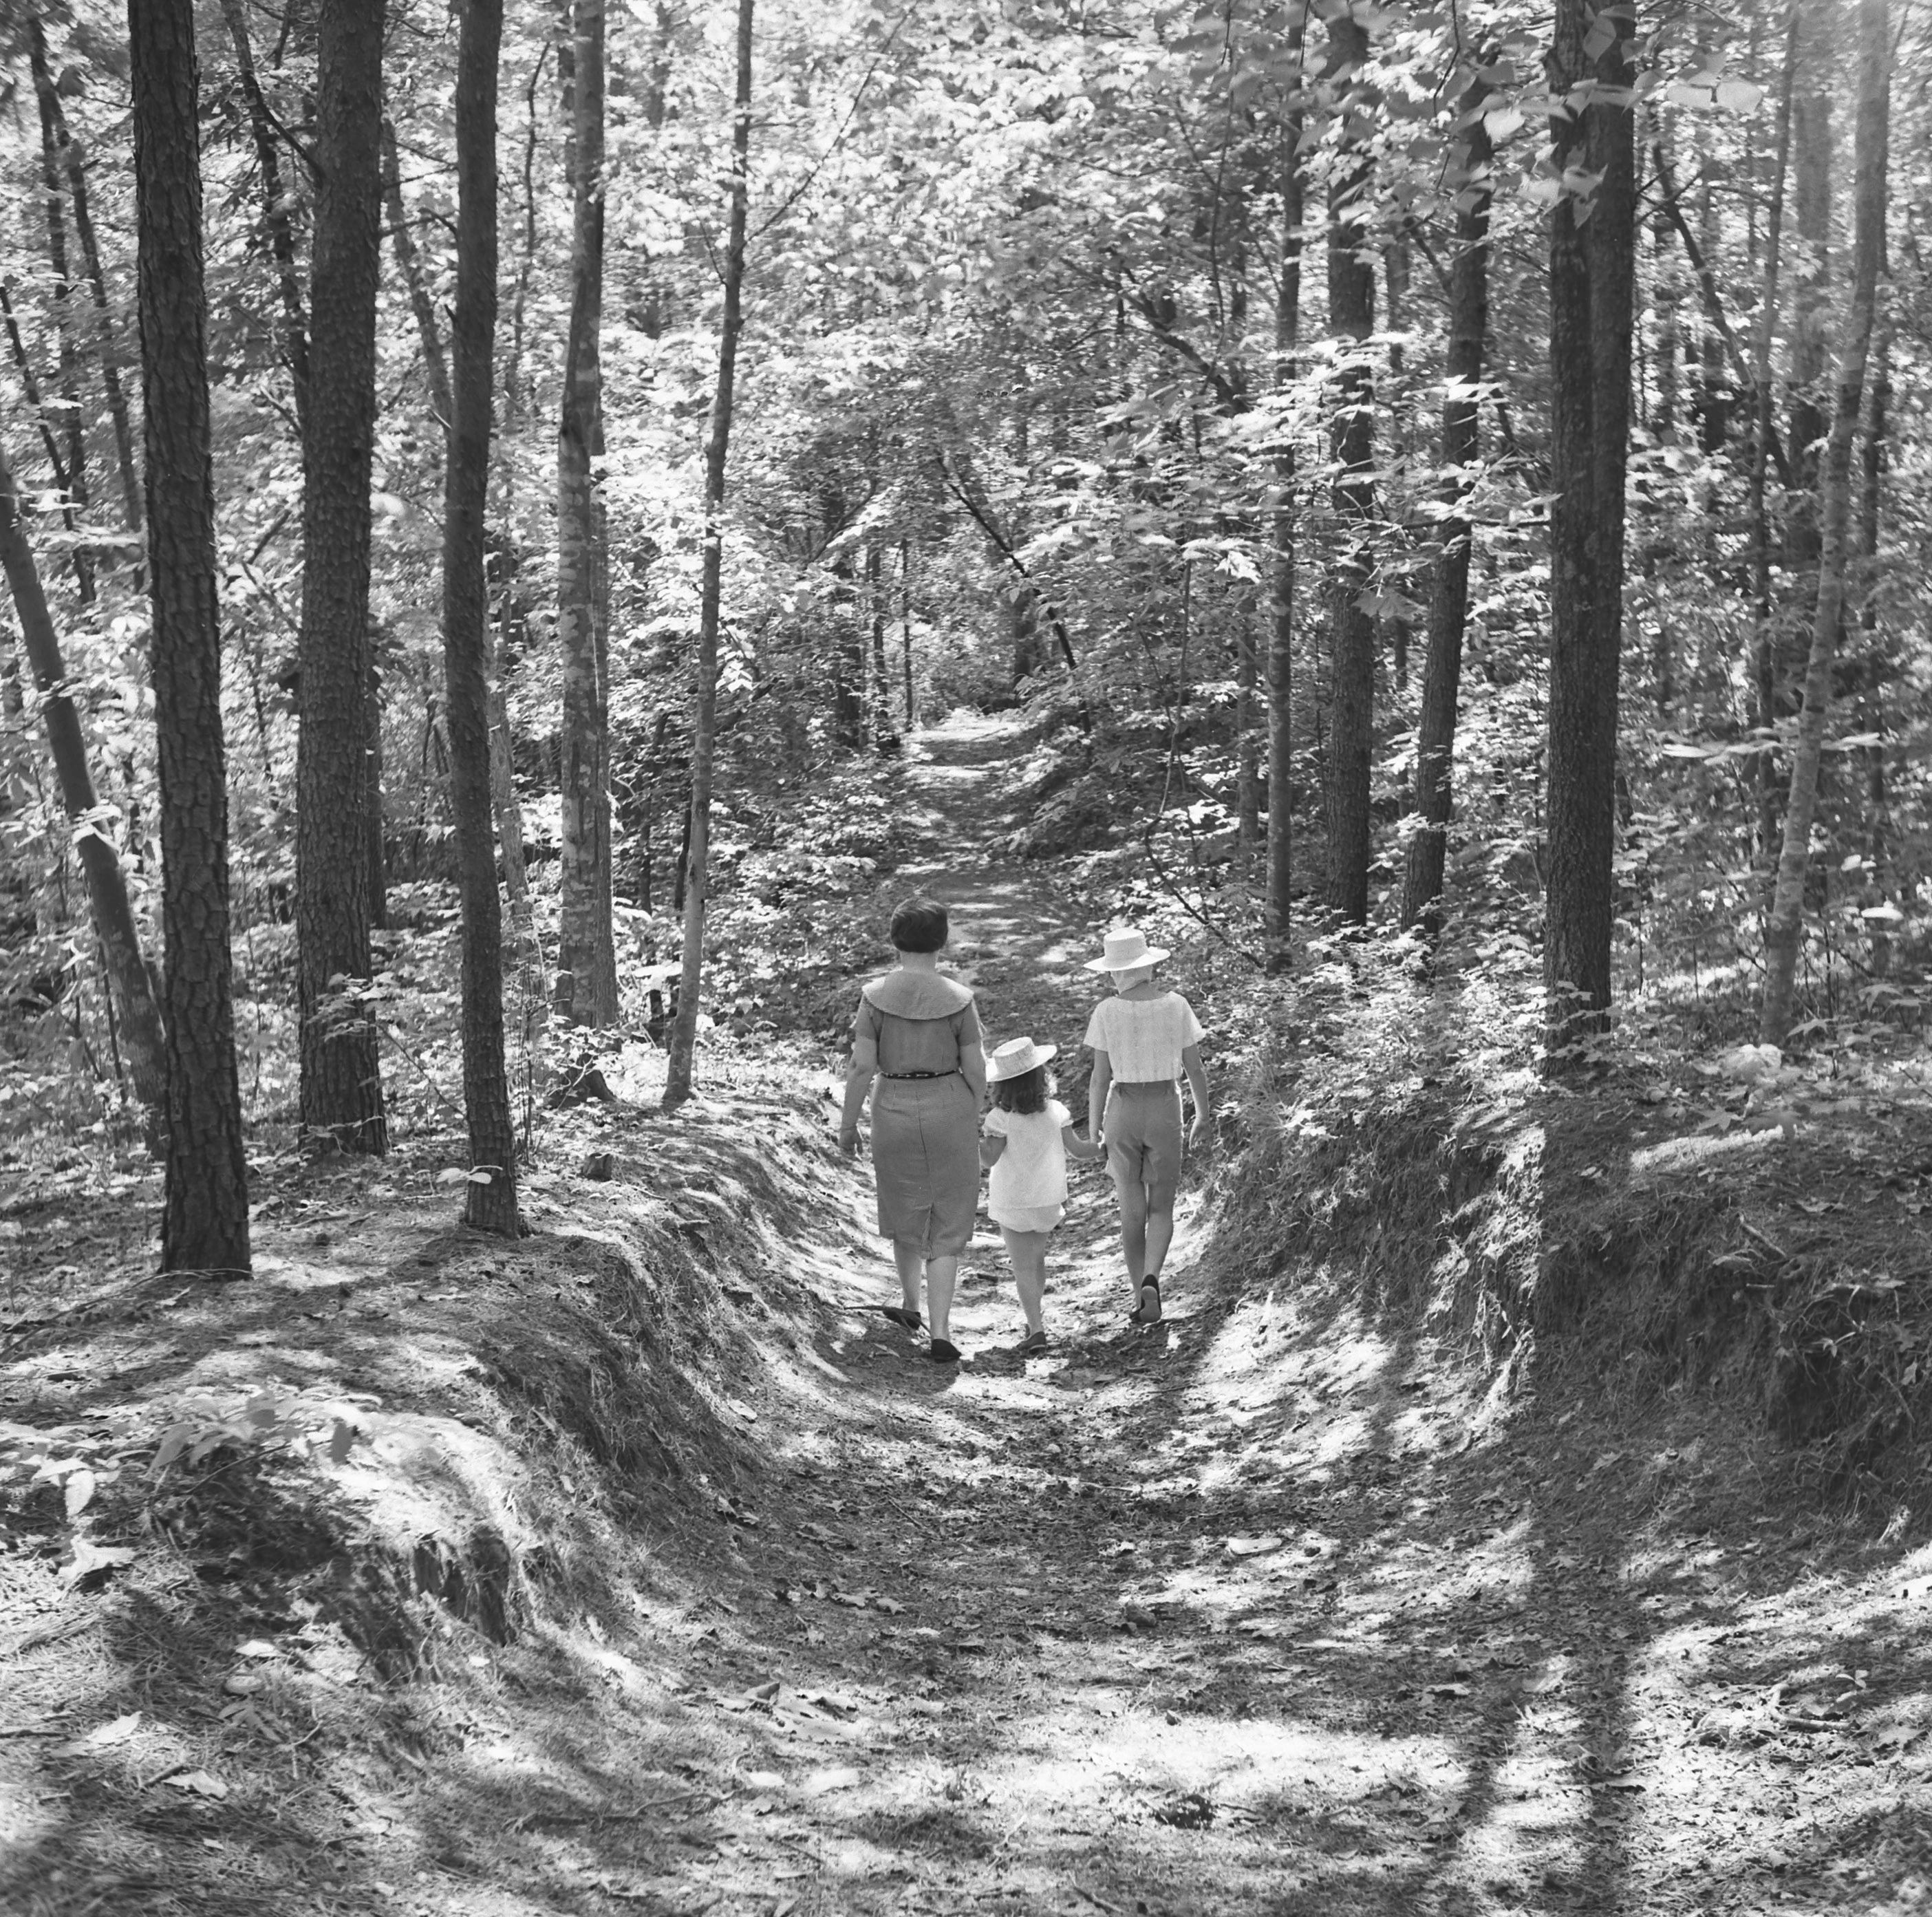 Black and white image of a woman walking with two children on the Noland Trail.